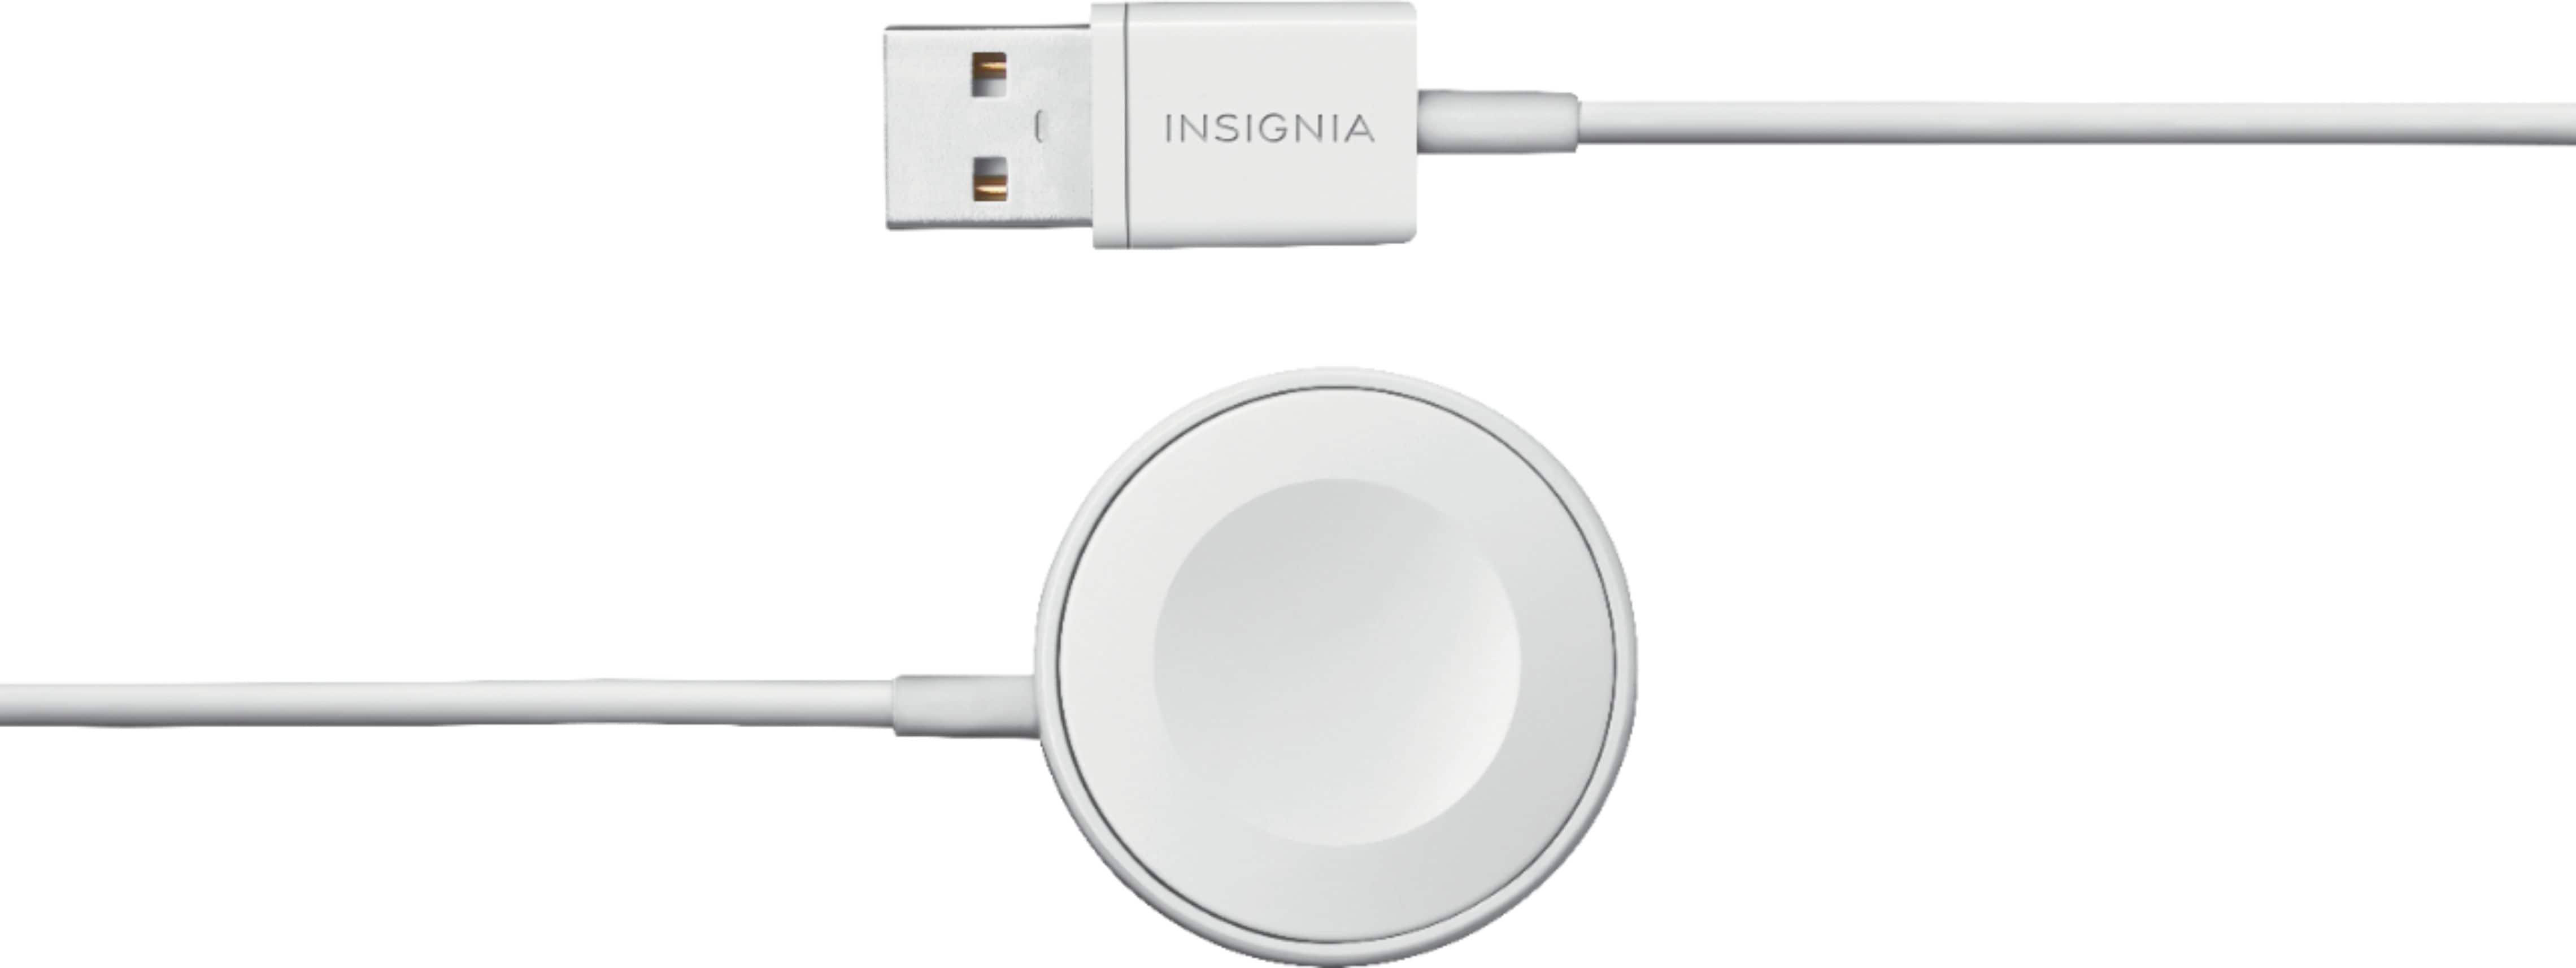 Apple Watch Magnetic Charging Cable (4 